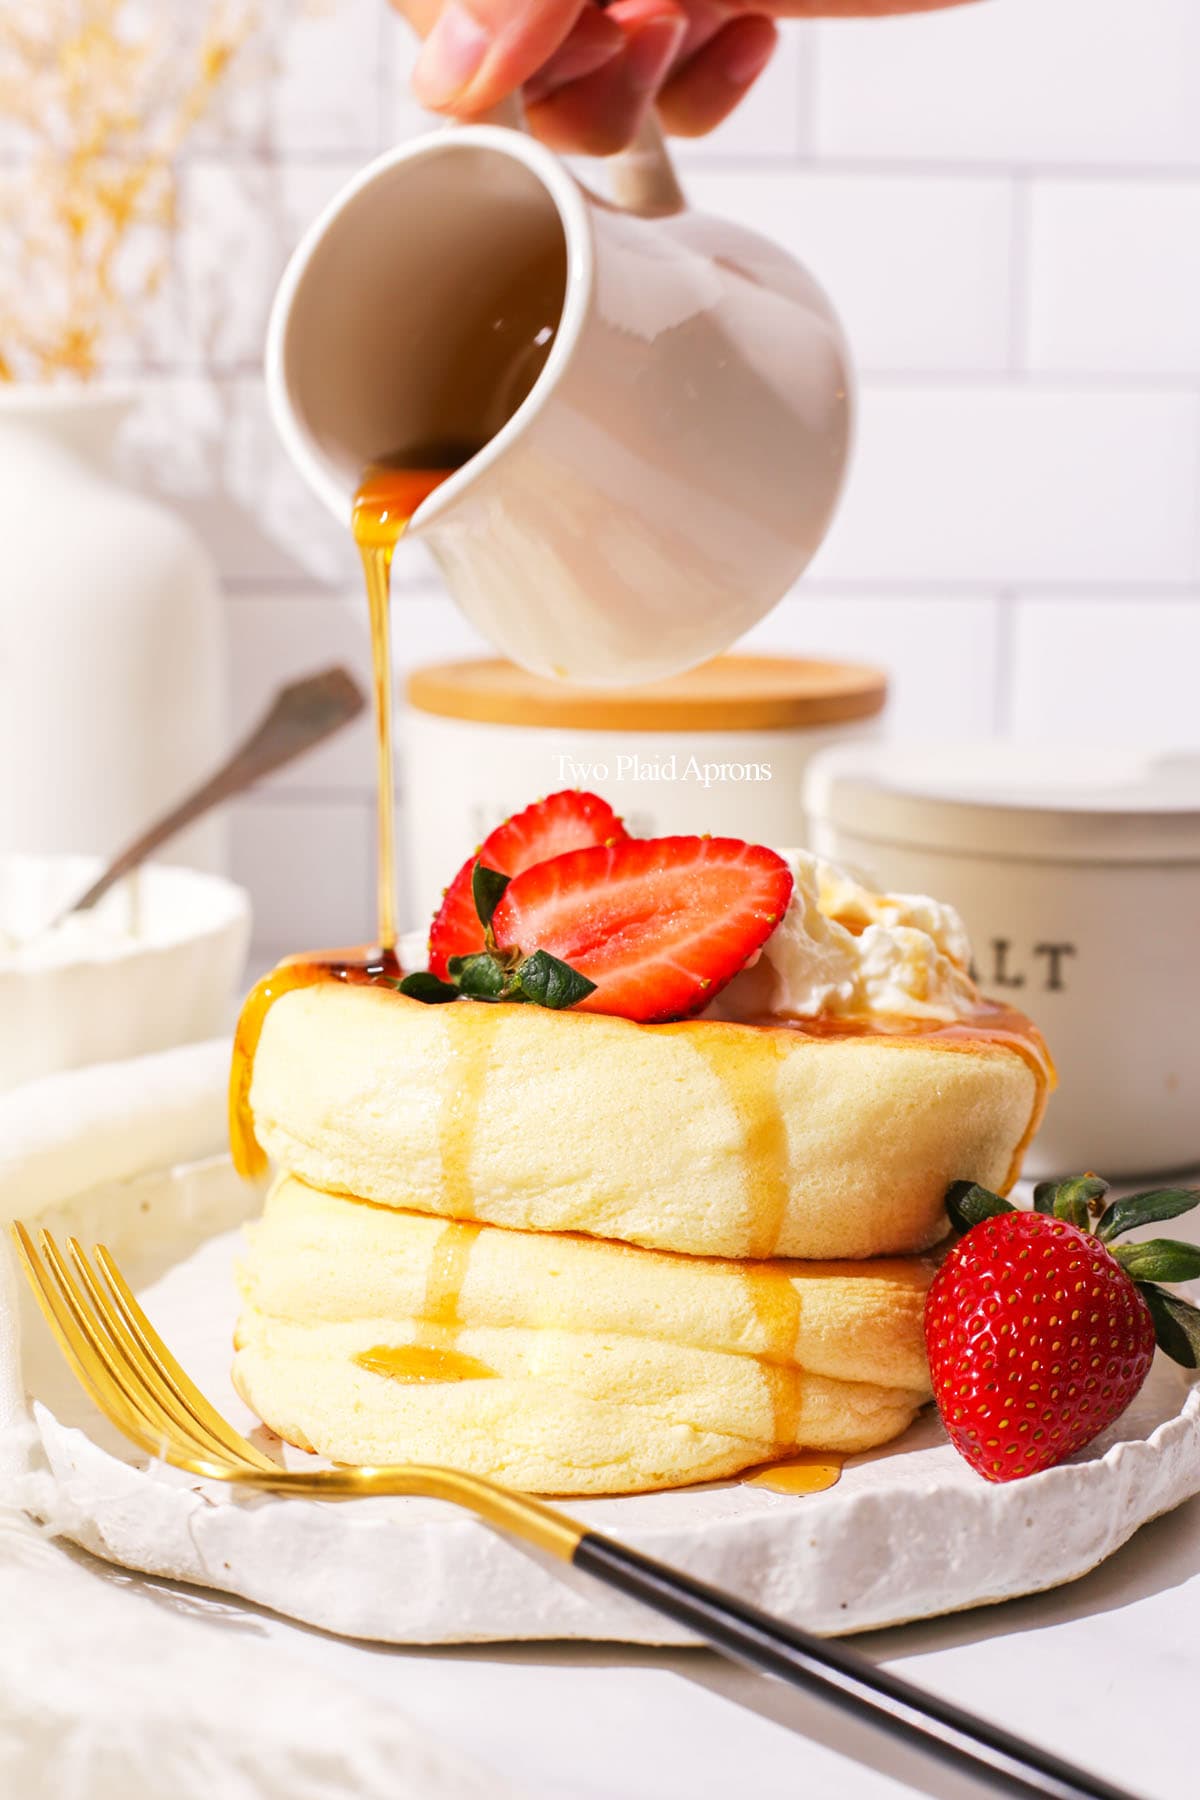 Pouring maple syrup onto a stack of Japanese soufflé pancakes.